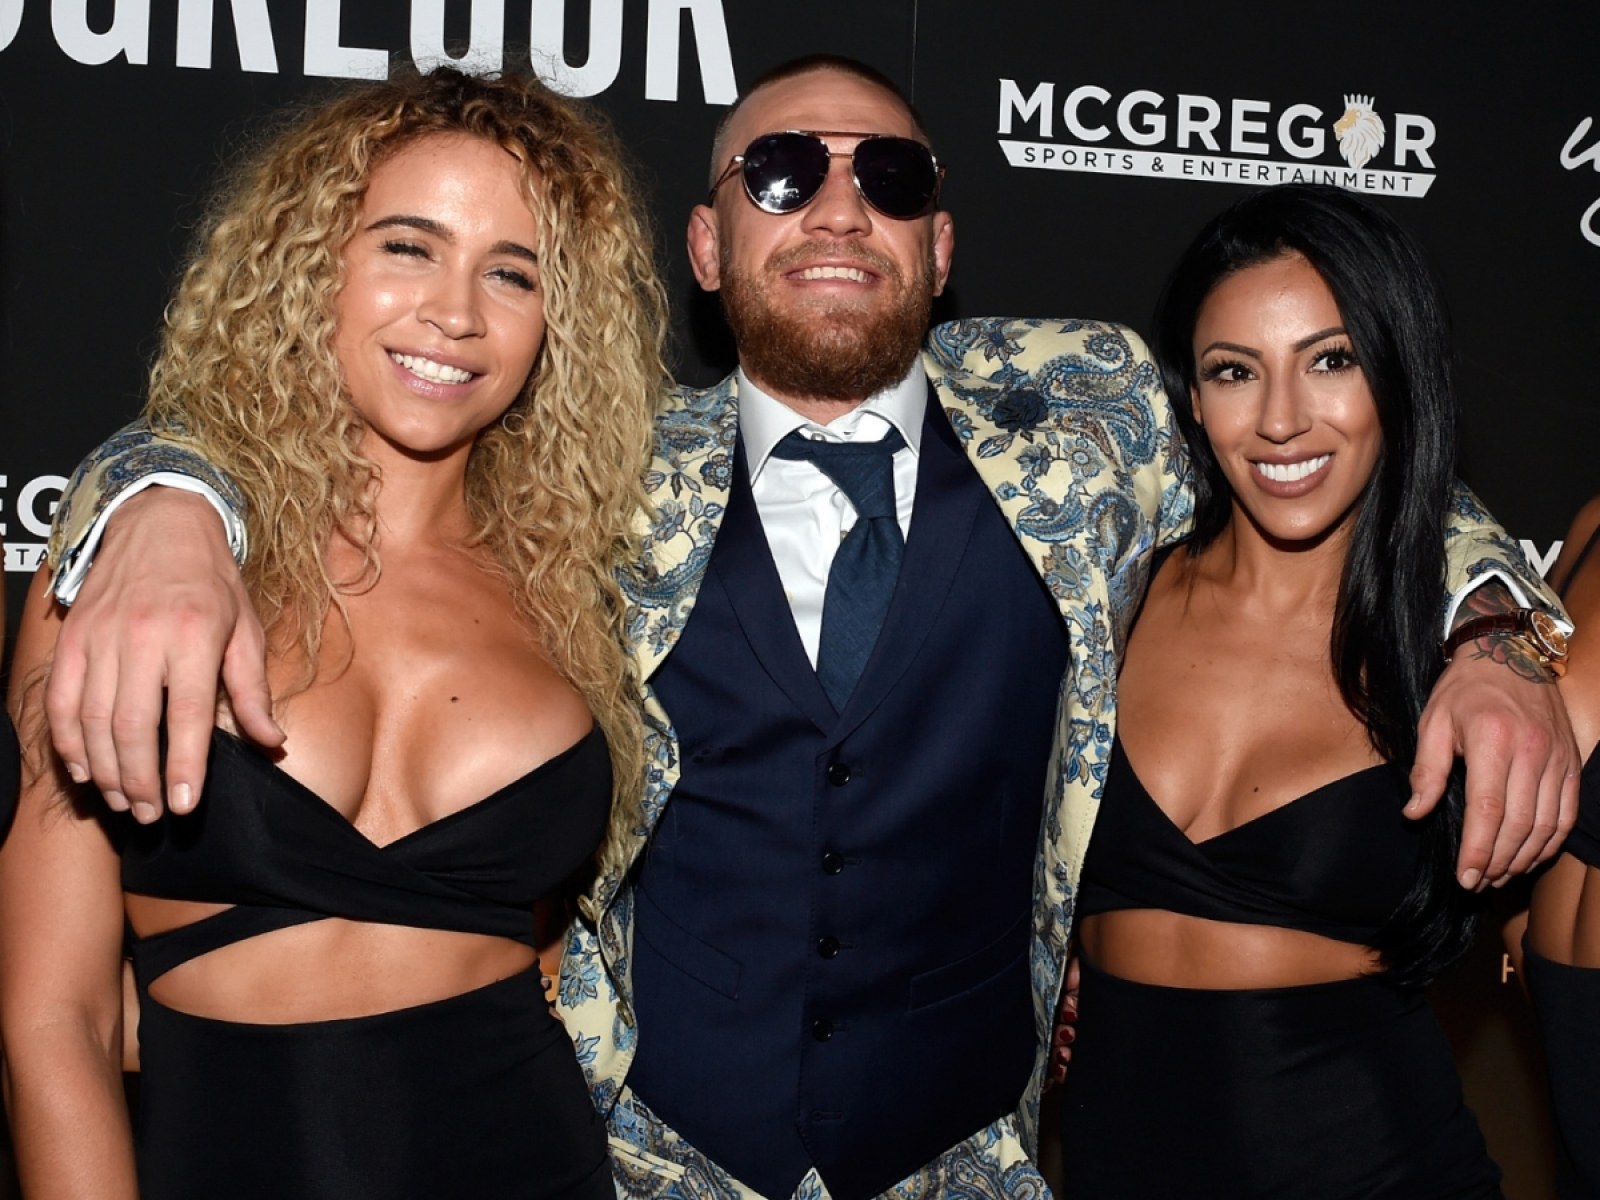 All forgiven? Conor McGregor spoils Dee Devlin with Louis Vuitton goods  after Rita Ora date night